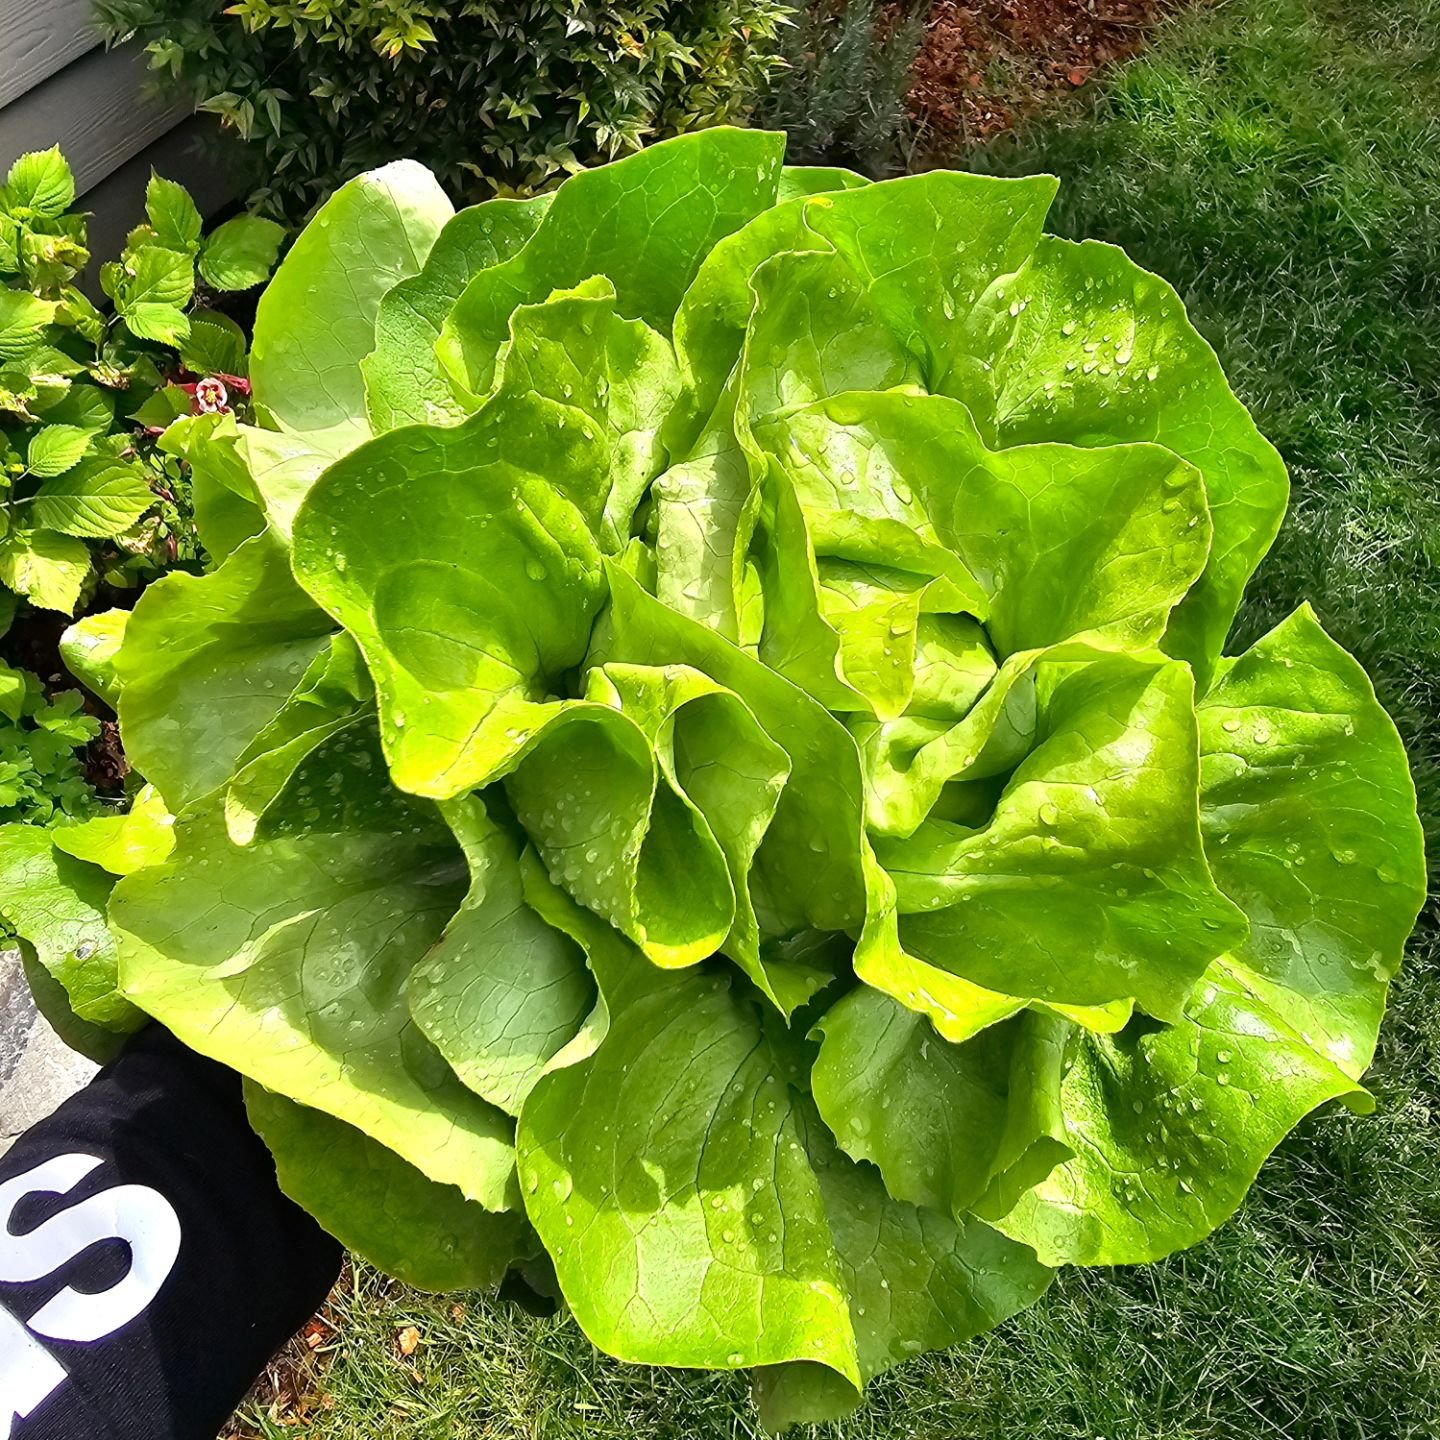 First butterhead lettuce harvest of the season! My garden is already overflowing with gorgeous lettuce, spinach, and kohlrabi. Very excited for this year's garden 🌱🥬🥗